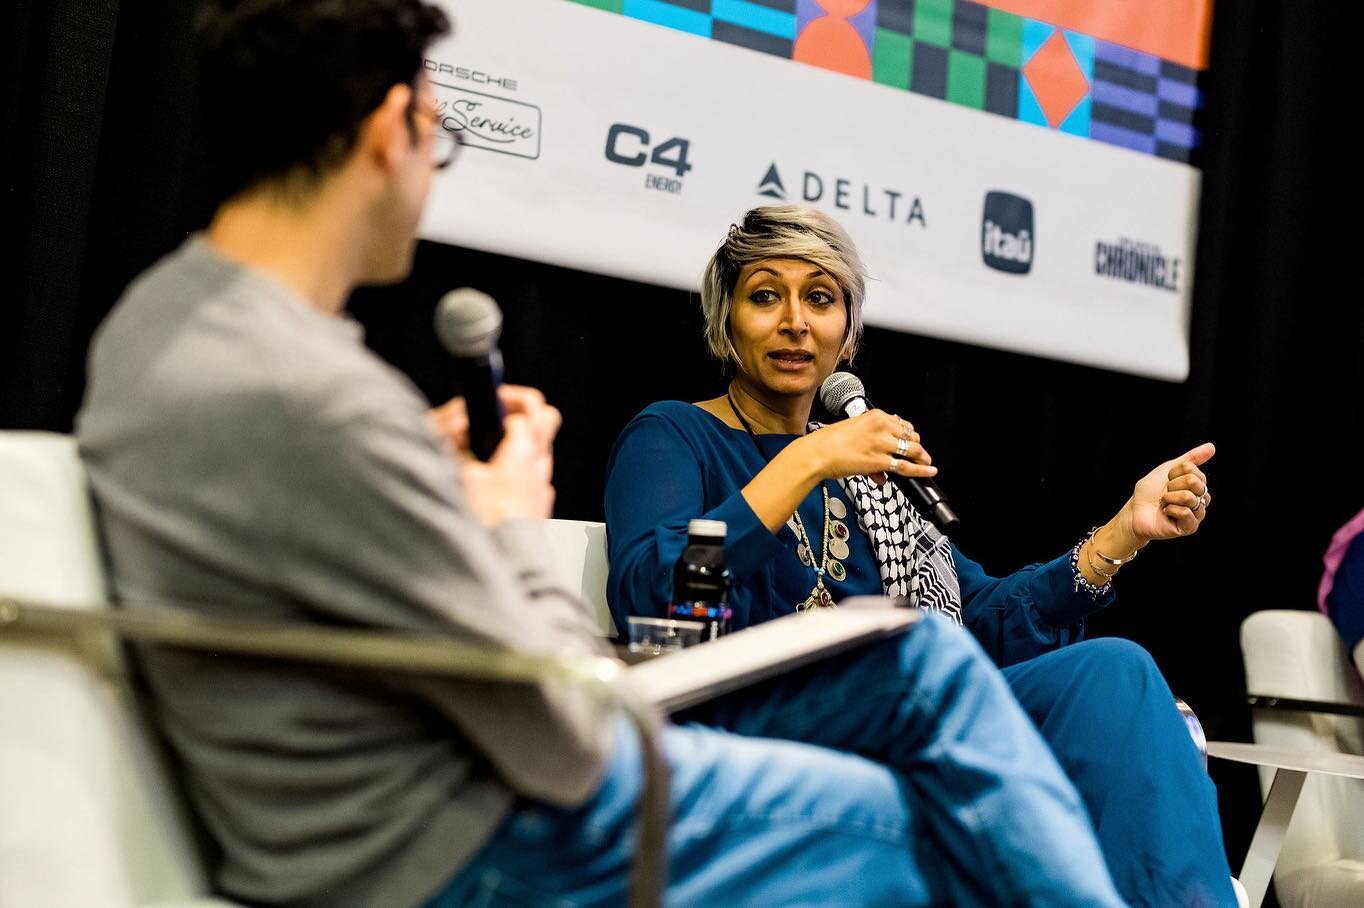 @dorisdukefdn&rsquo;s President &amp; CEO Sam Gill moderates a discussion about Muslim censorship and how it can be avoided in News and Media with panelists @irampbilalofficial @imanzawahry and @ahmedahmedcomedy at @sxsw 2024

📸 @laurenlindleyphoto